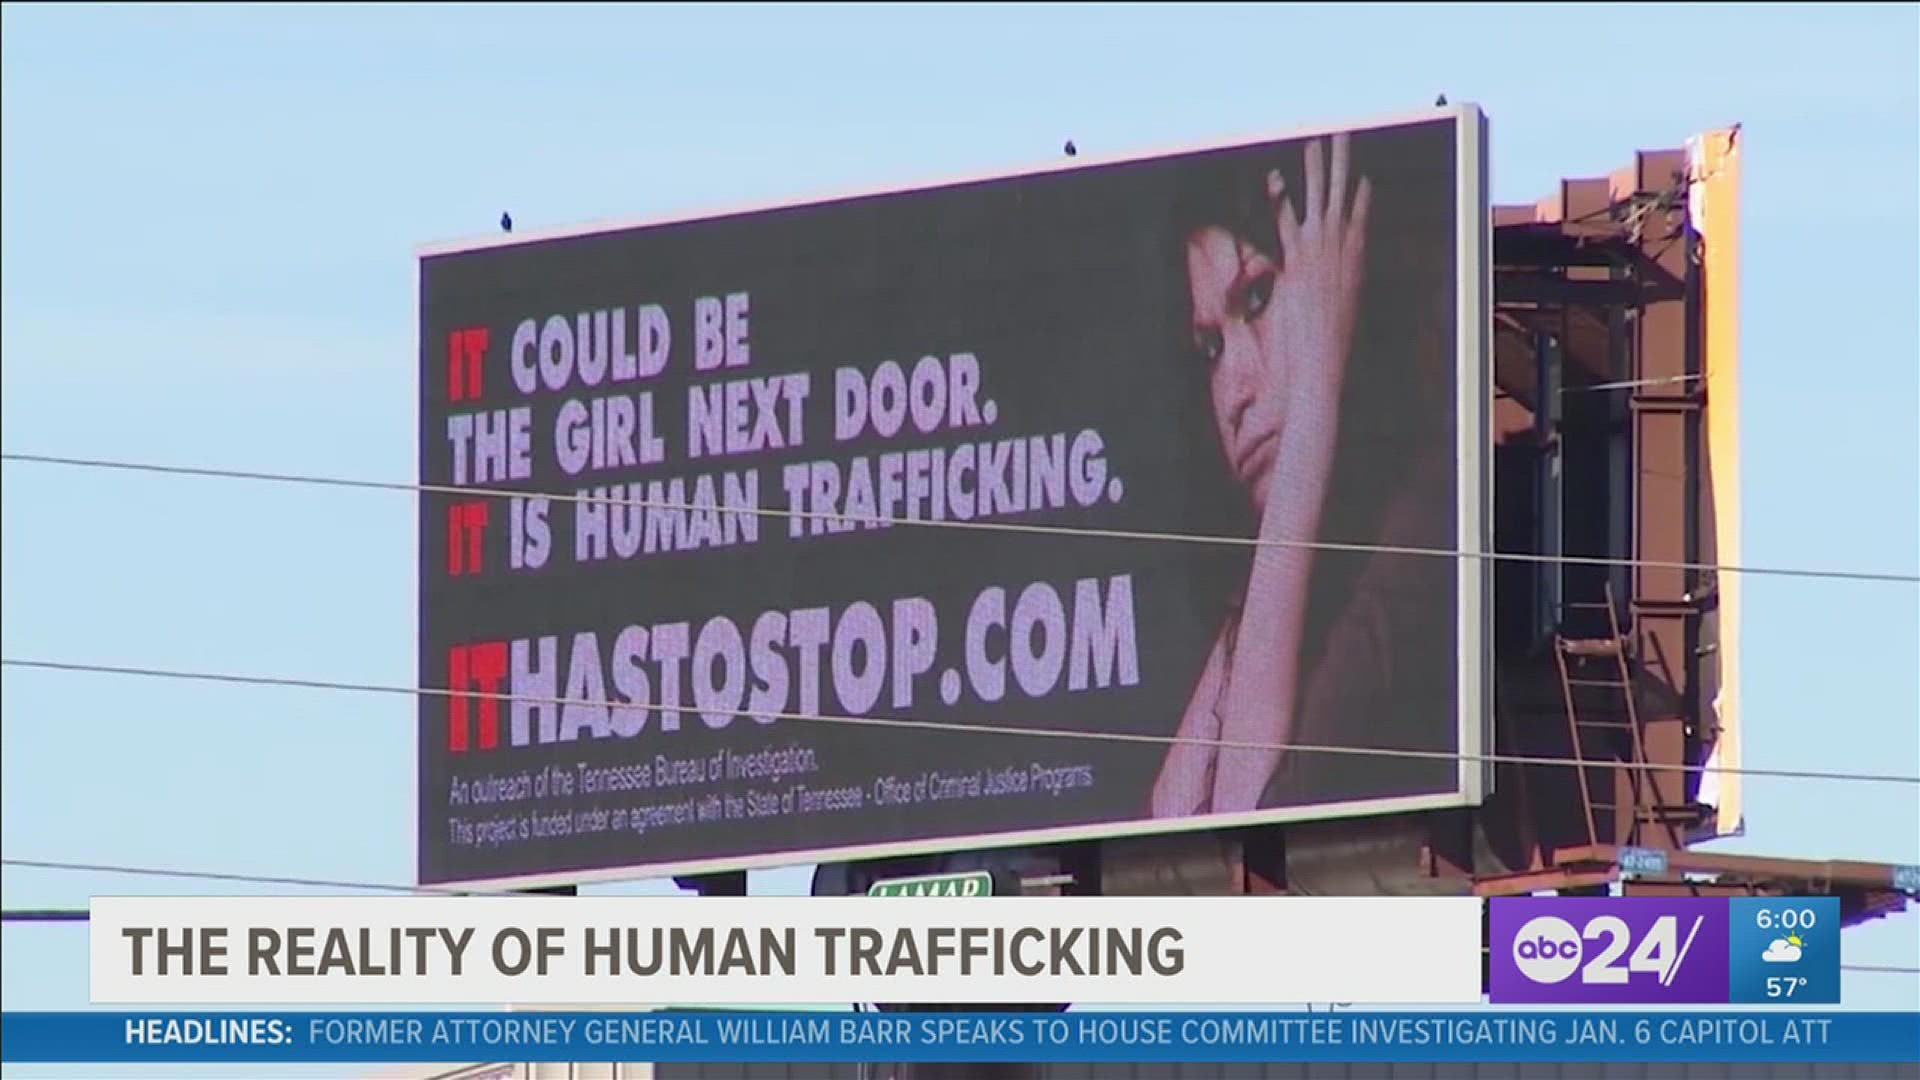 Memphis-based organizations are stepping up to educate and advocate for victims of human sex trafficking after 10 people were arrested Monday for human trafficking.